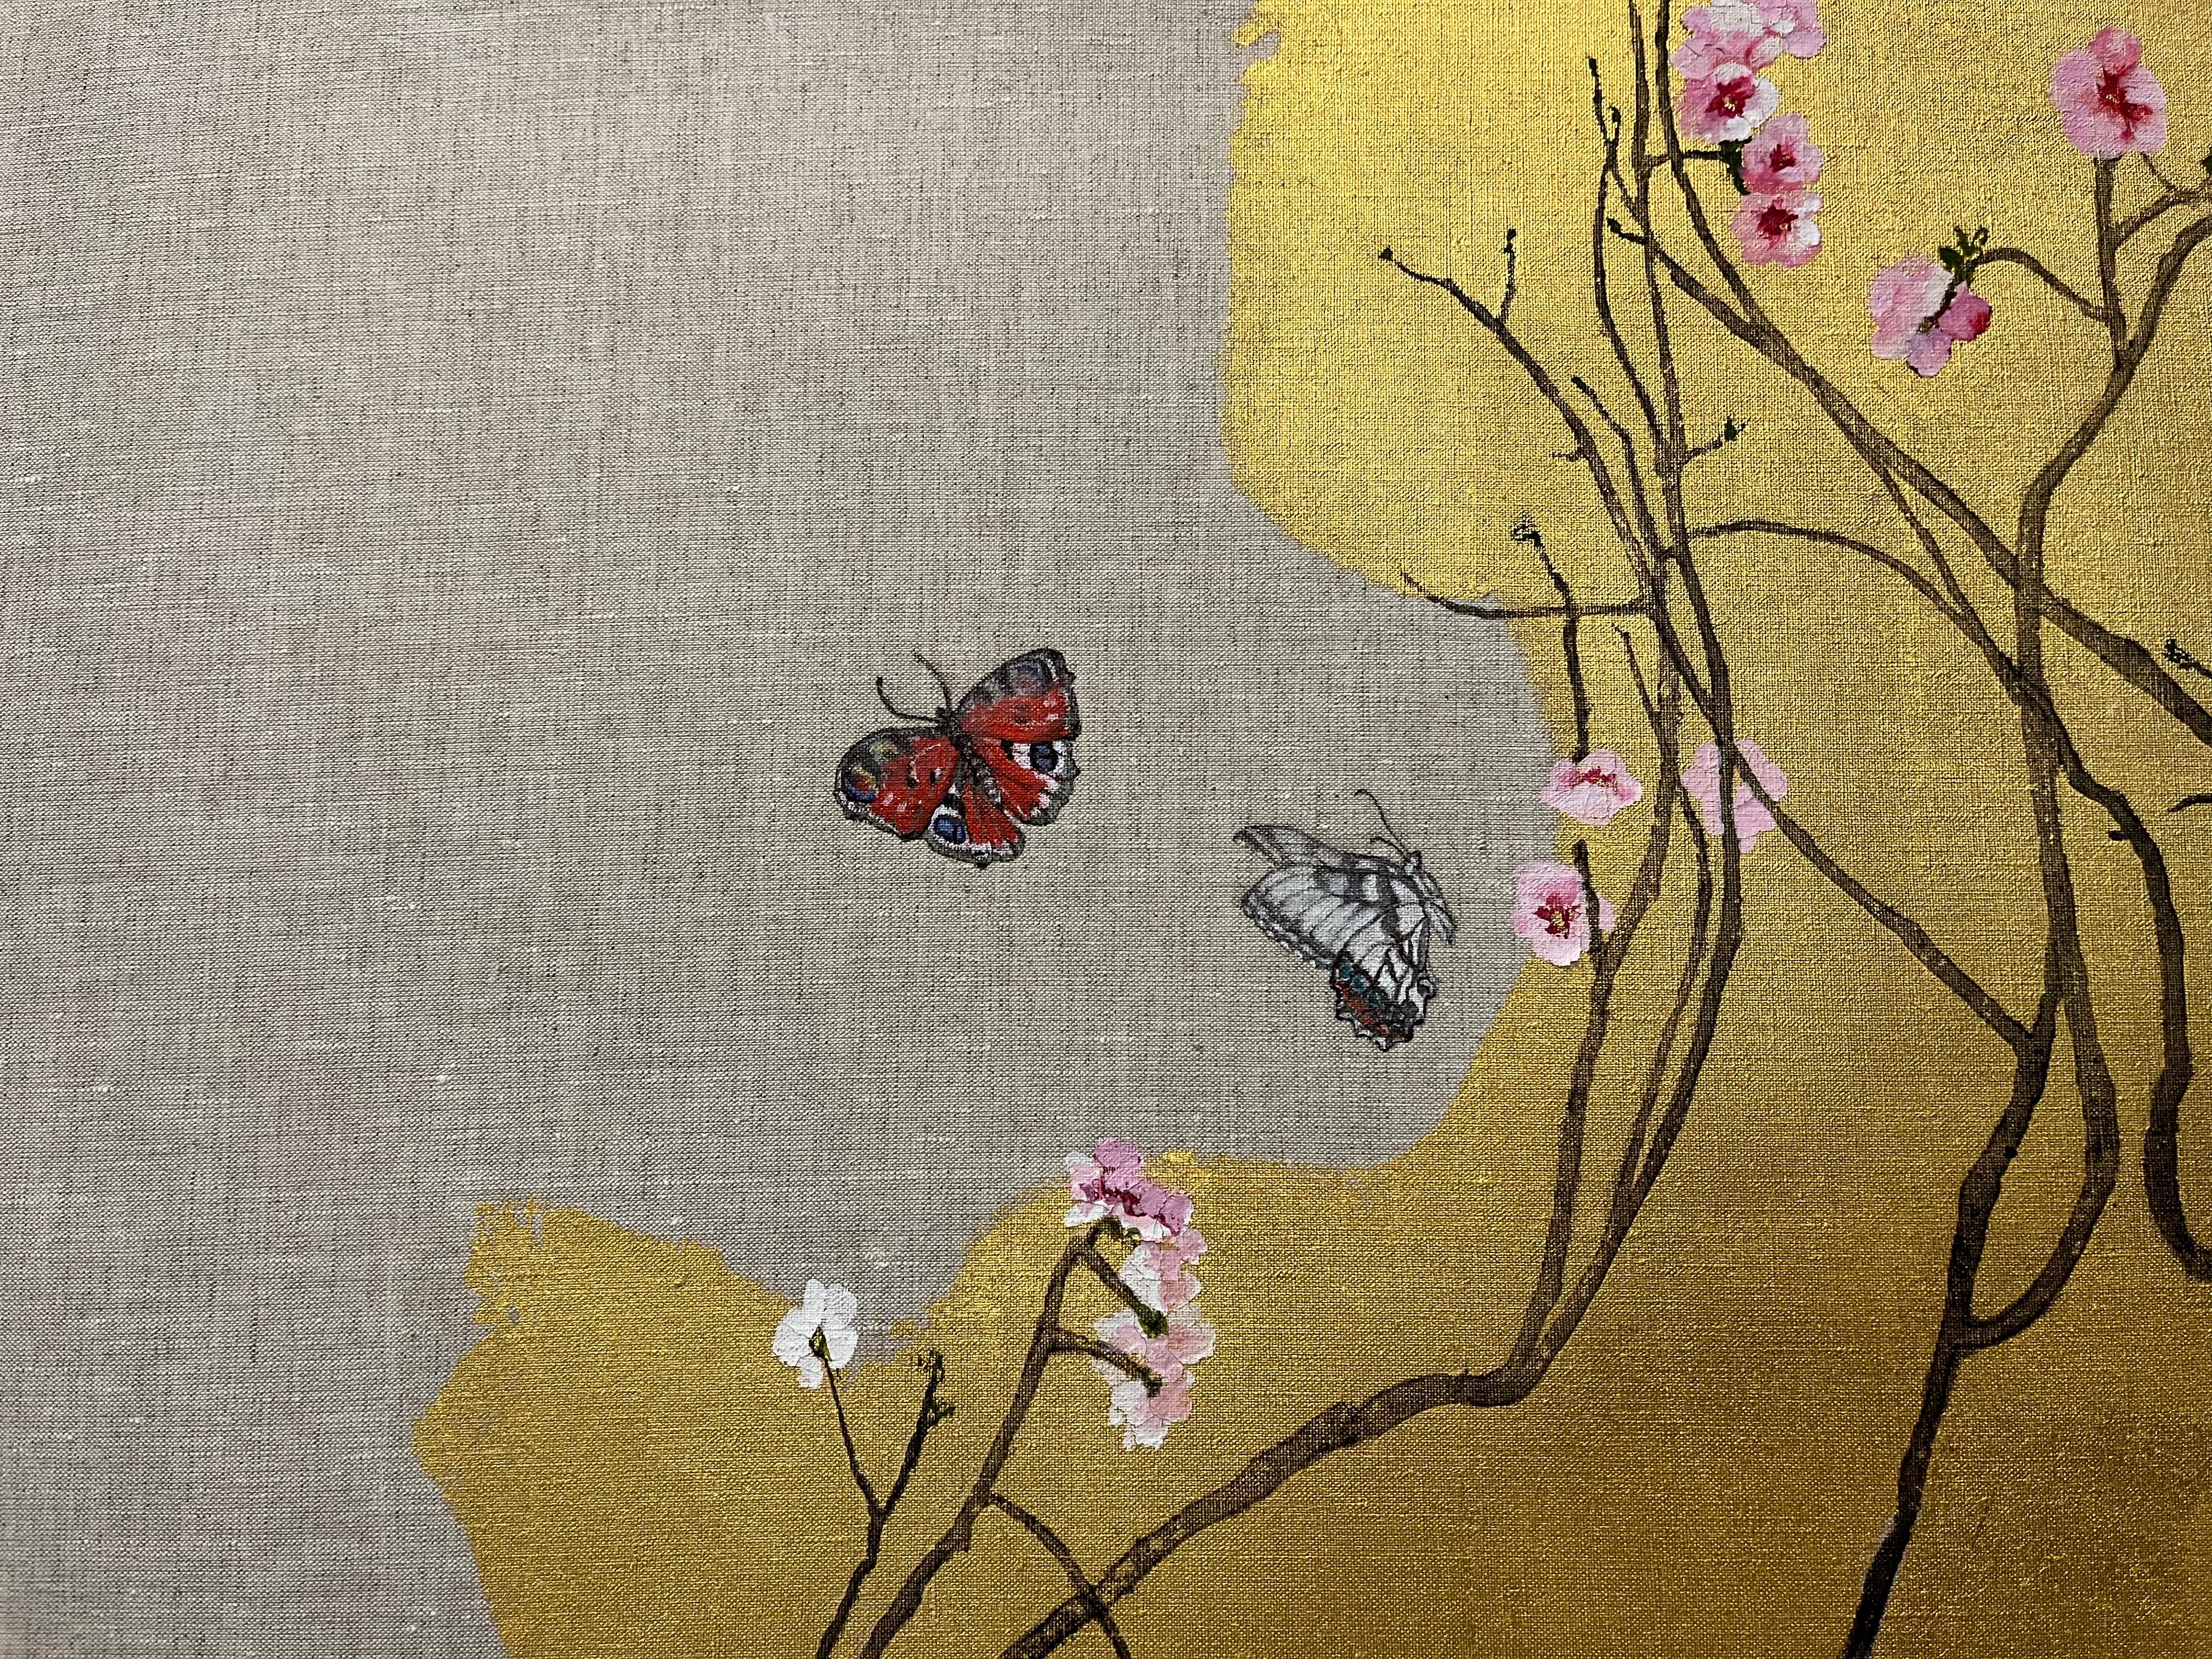 Peach blossom, pink and butterflies, on old foreground painting. Innovative - Painting by Margherita Leoni